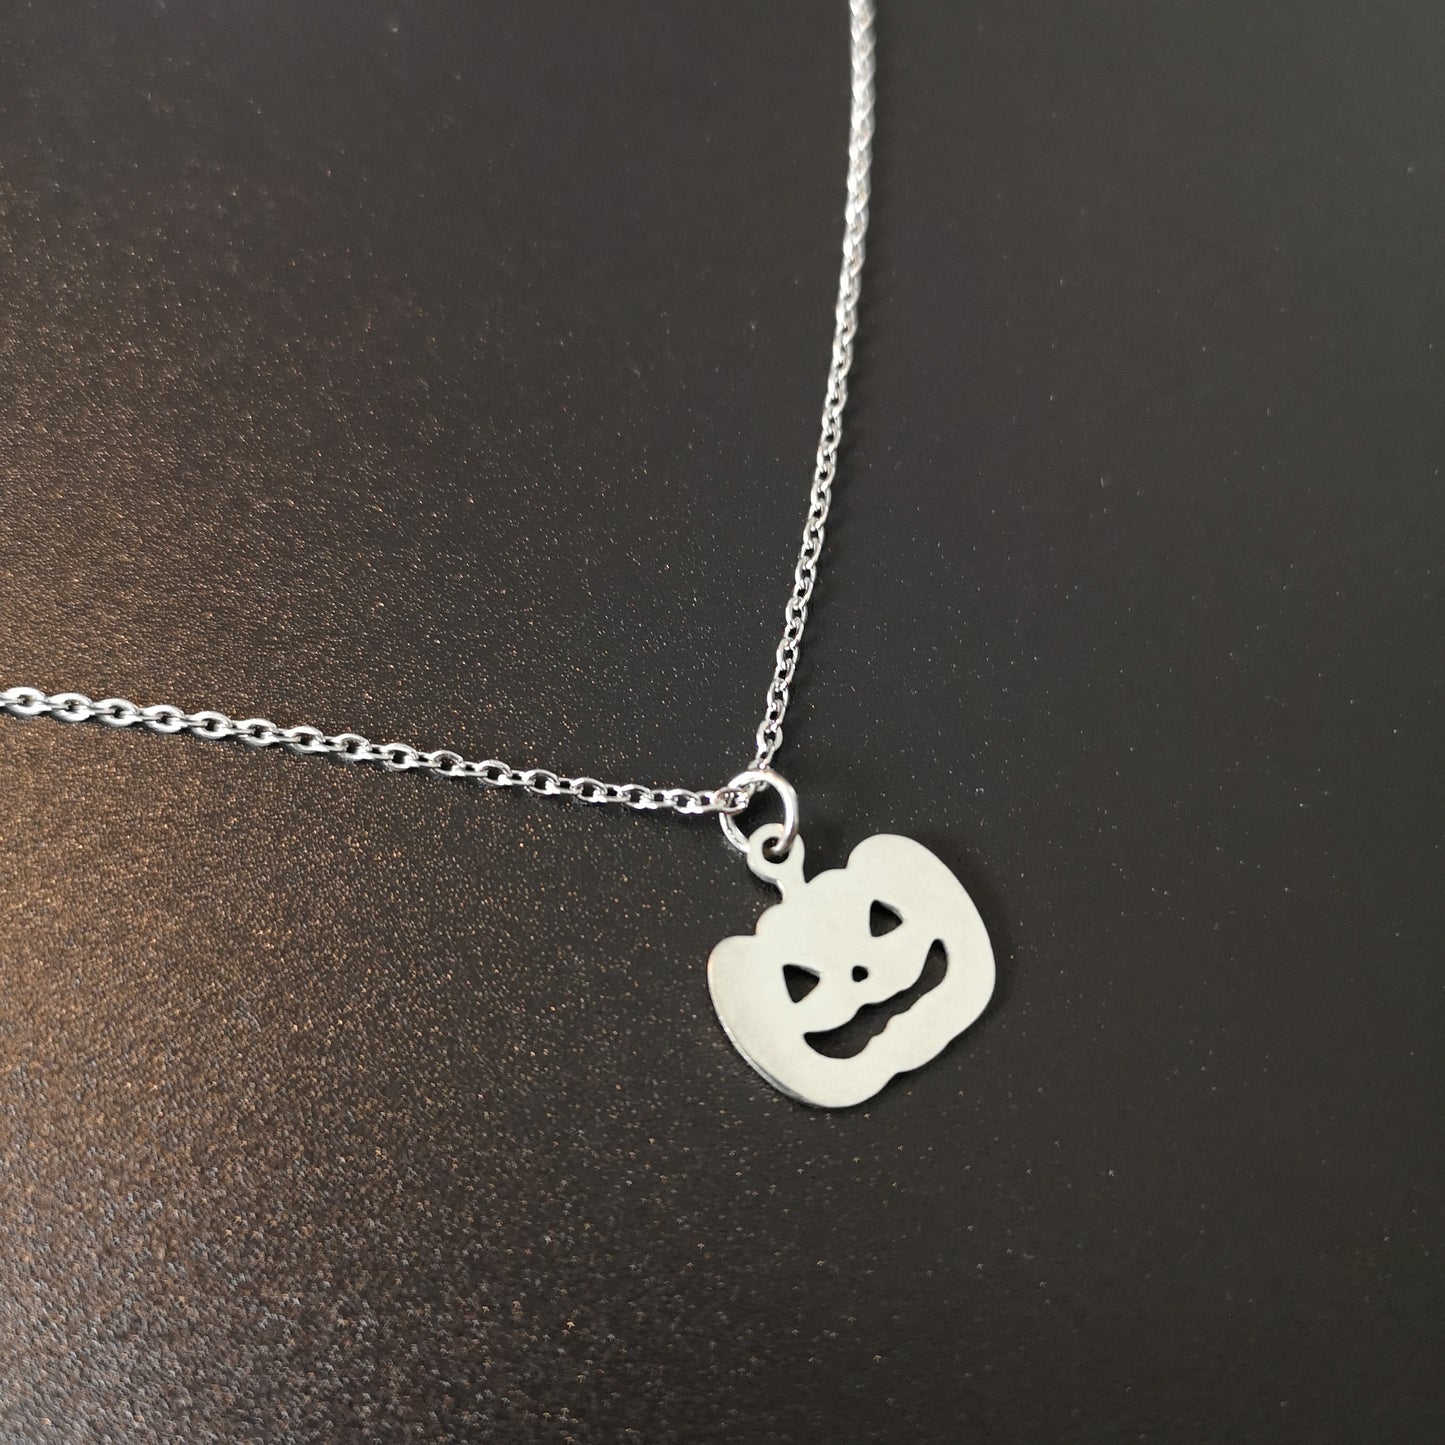 Carved pumpkin pendant necklace stainless steel Halloween jewelry - The French Witch shop